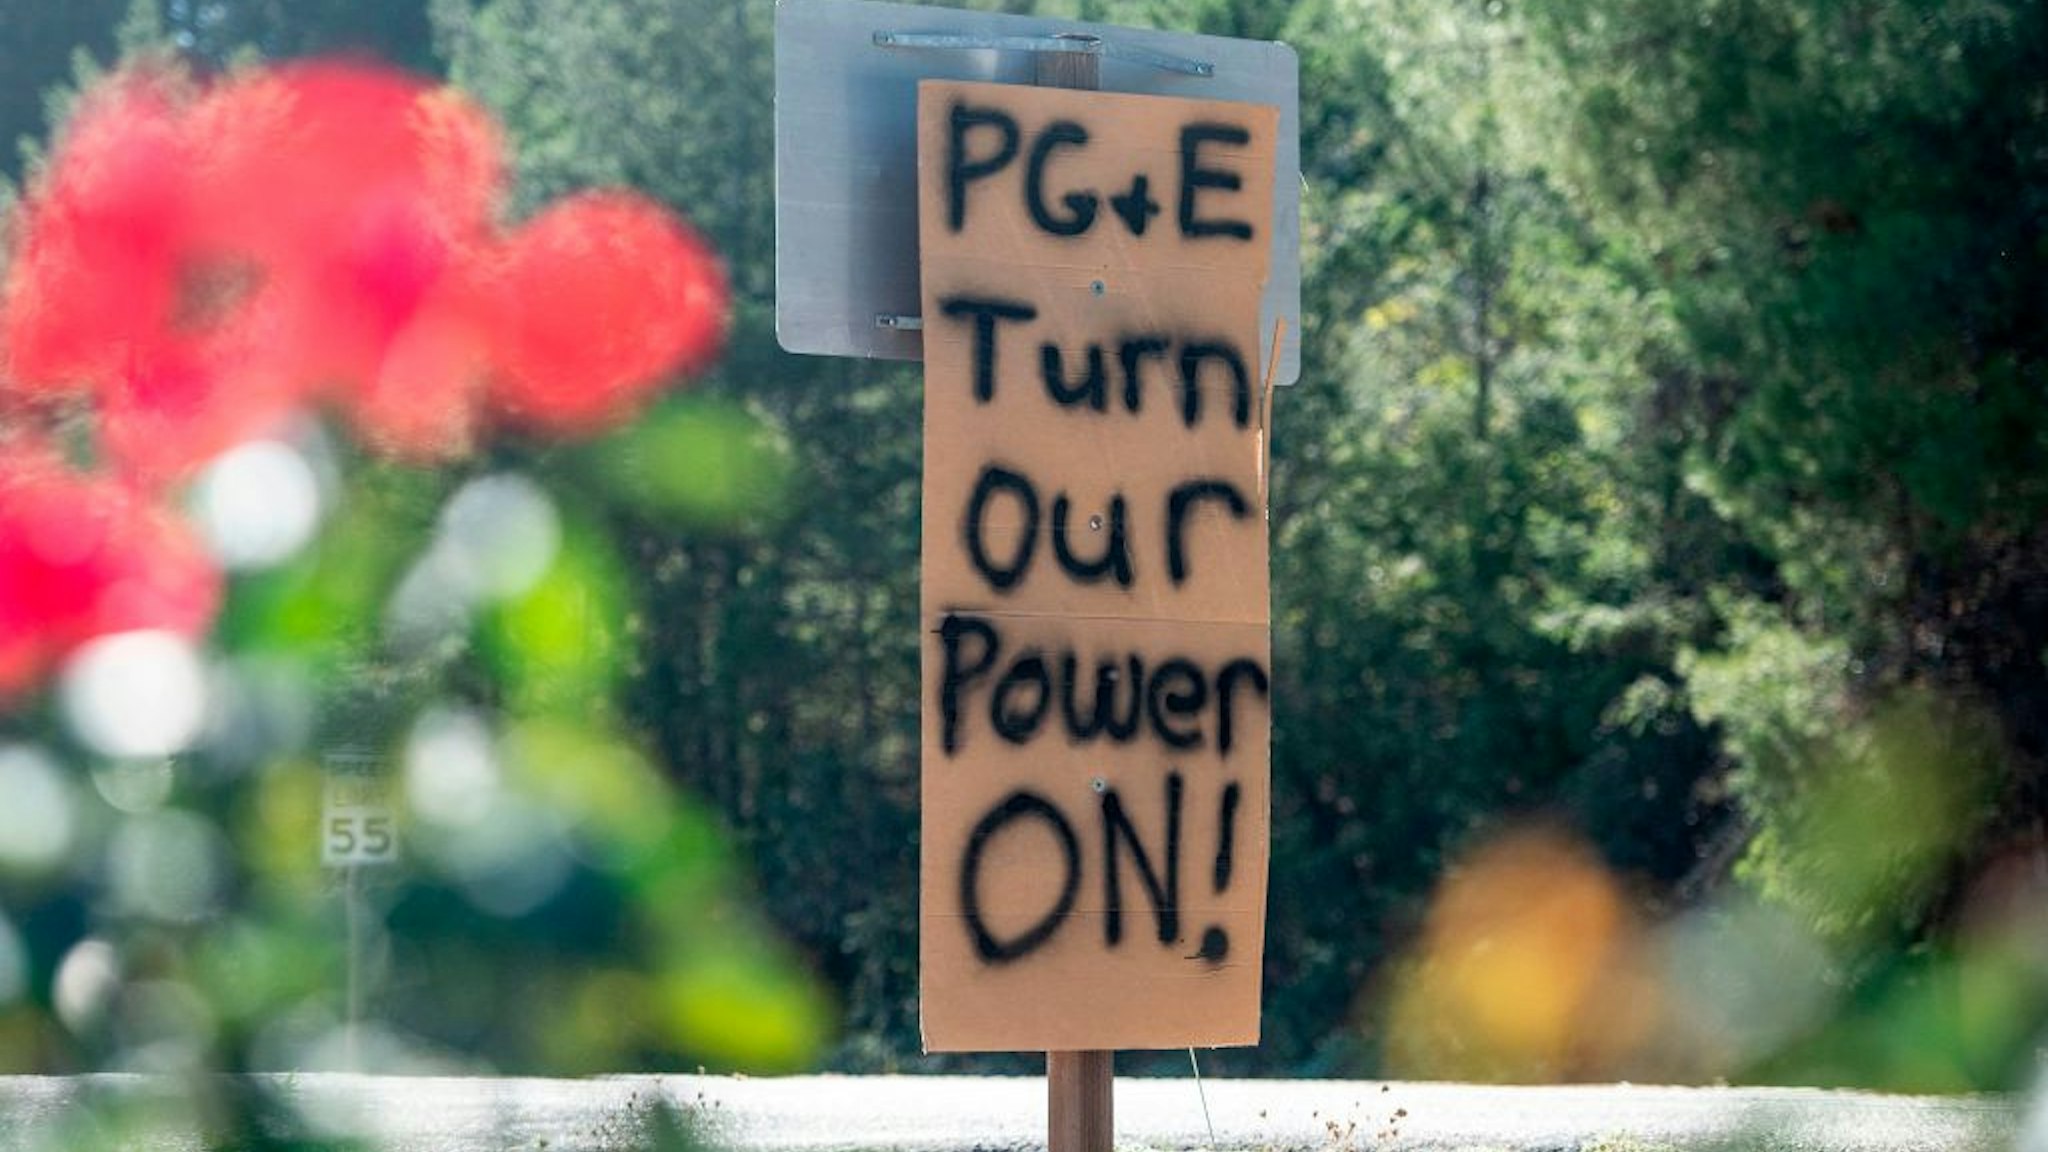 A sign calling for utility company PG&E to turn the power back on is seen on the side of the road during a statewide blackout in Calistoga, California, on October, 10, 2019